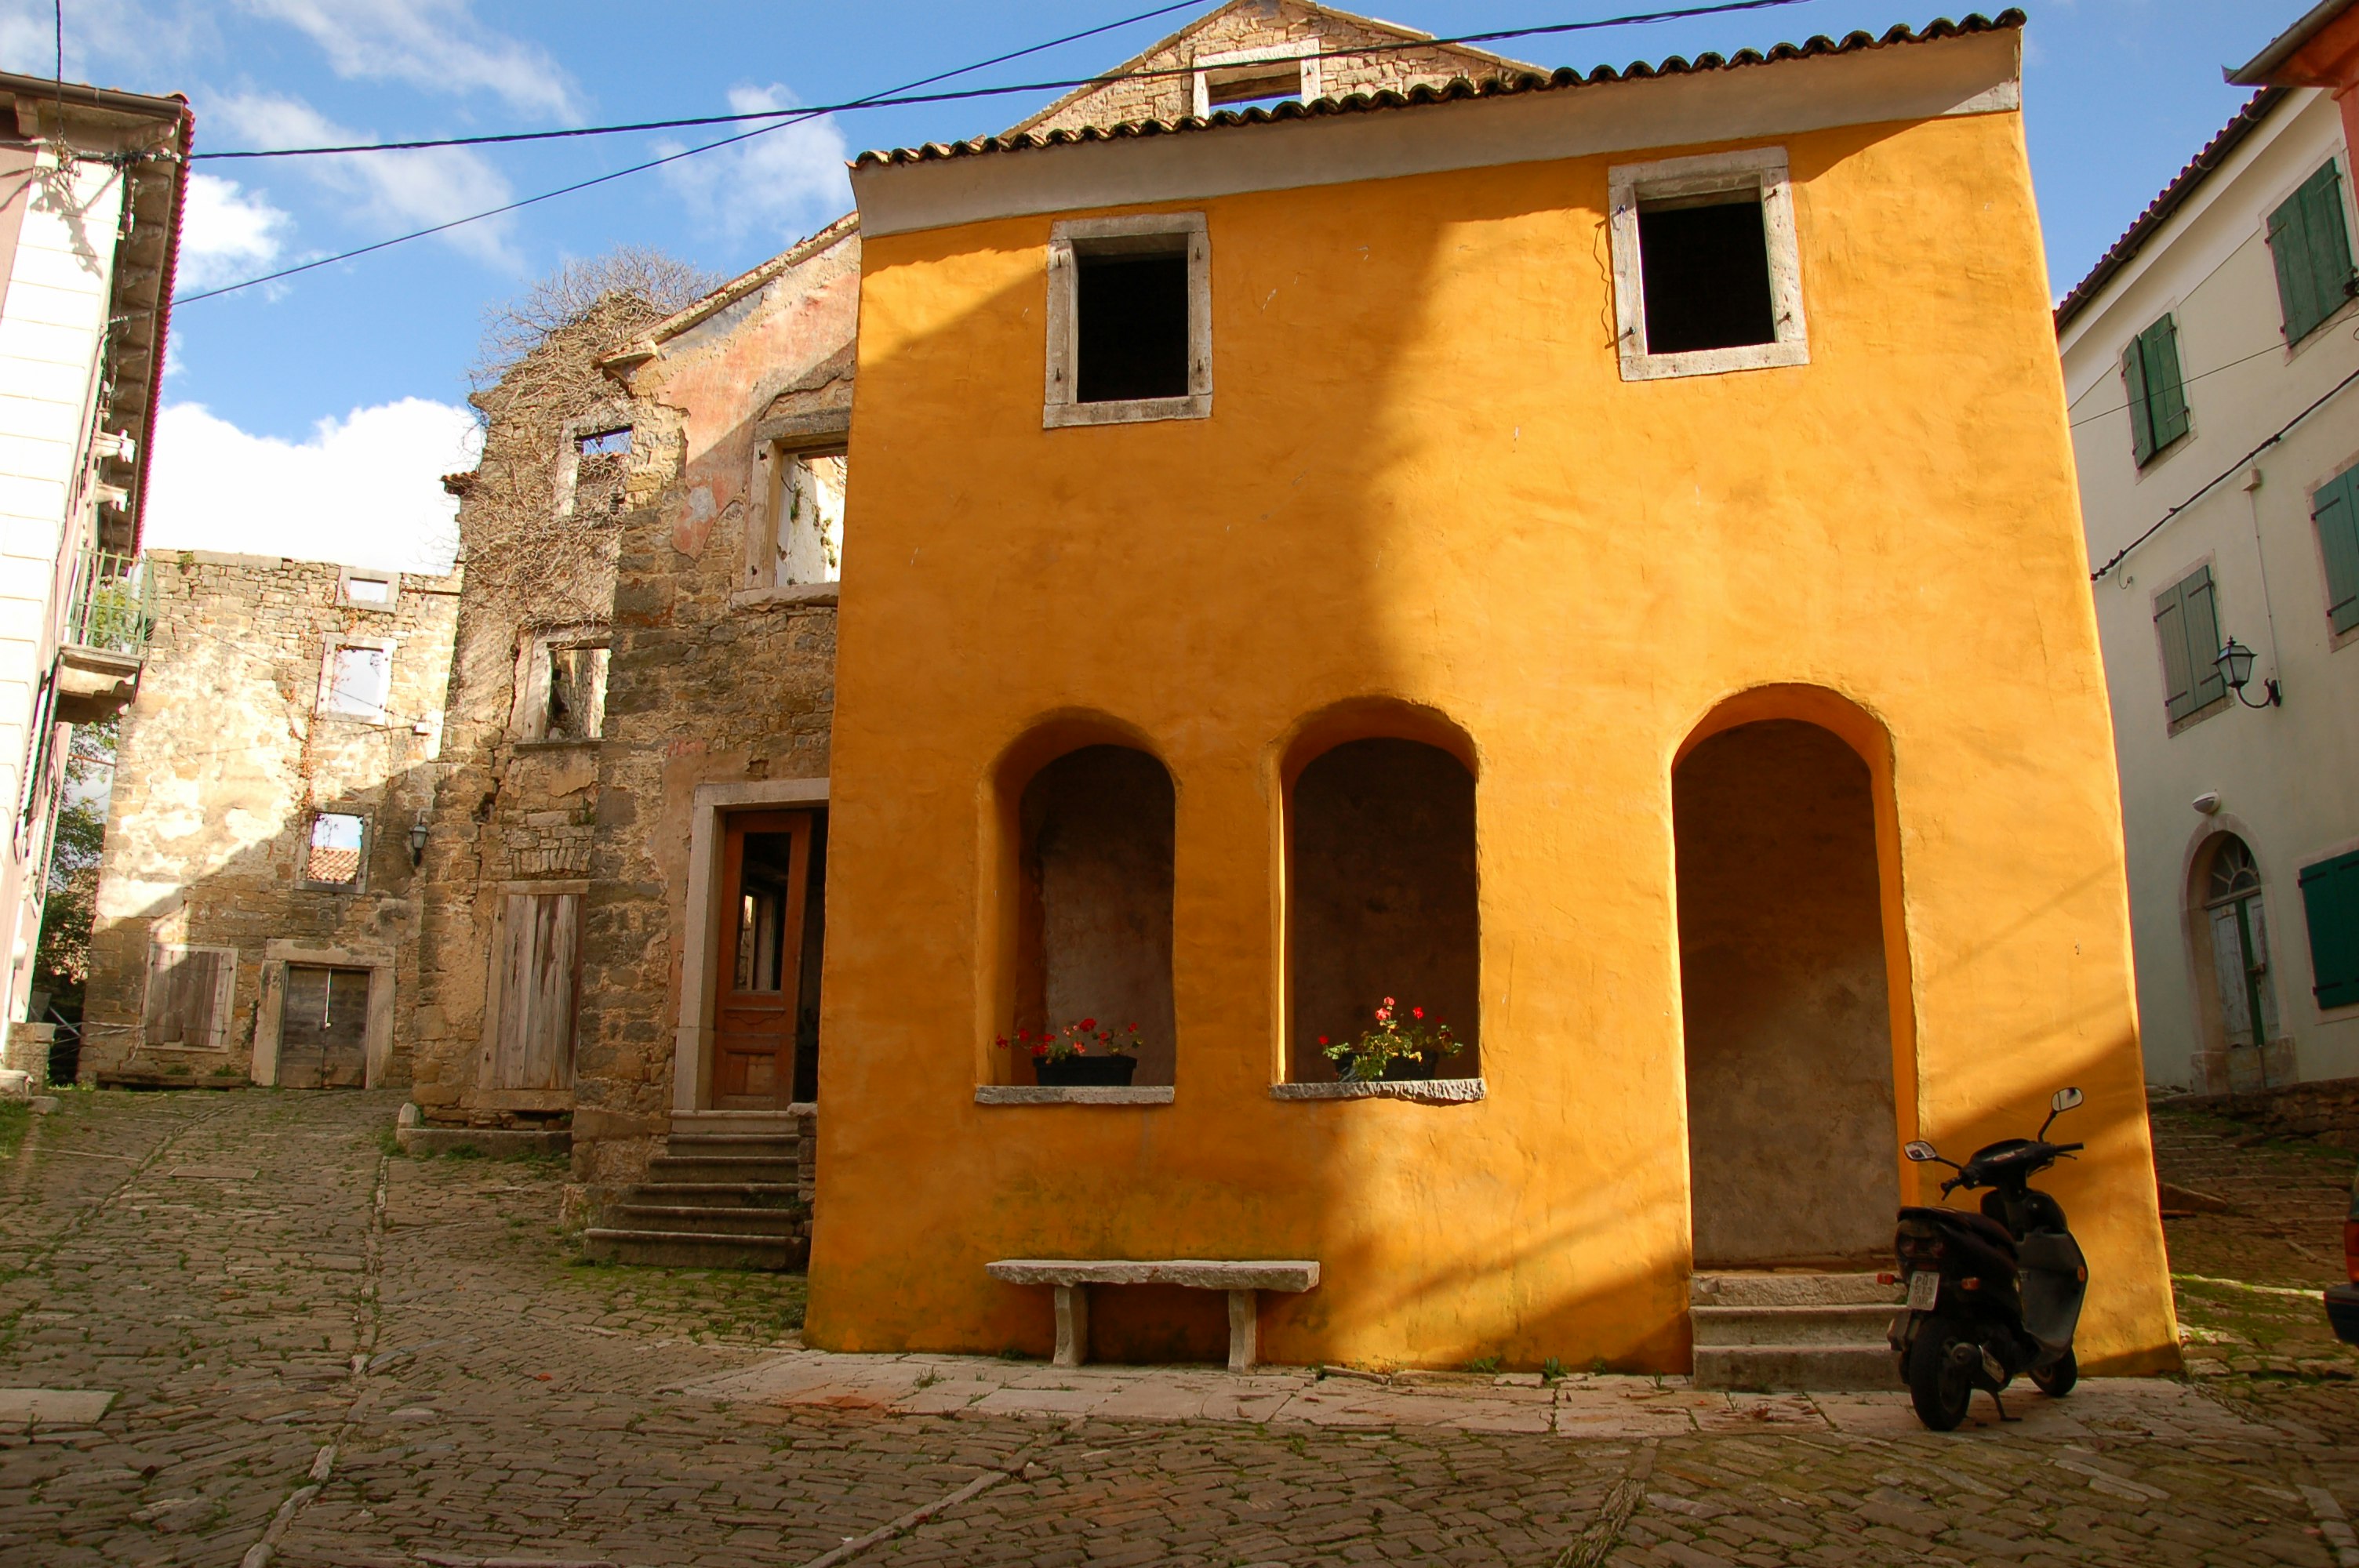 An orange stucco building with arched windows and doors on the ground floor and square windows rimmed in white sills on the upper floor sits in the winding medieval streets of Oprtalj. Behind the orange building are empty ruins of other similar stone houses. In the foreground a motorcycle is parked  